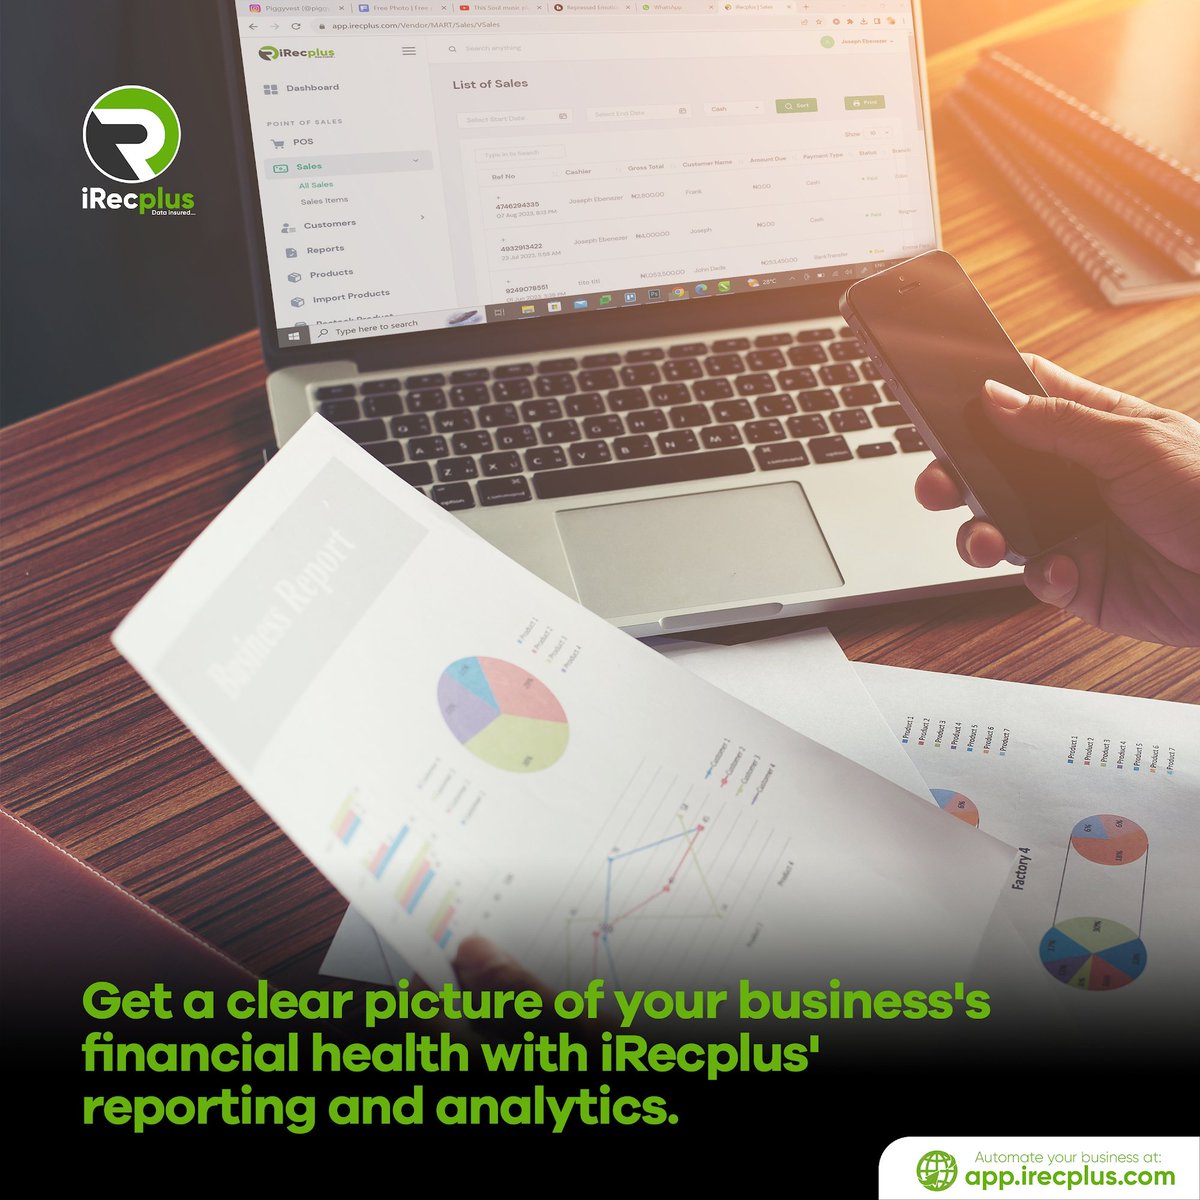 Don't be in the dark about your business's financial health! 

Get a clear picture with iRecplus' analytics and reporting! 

Visit app.irecplus.com to get started today.